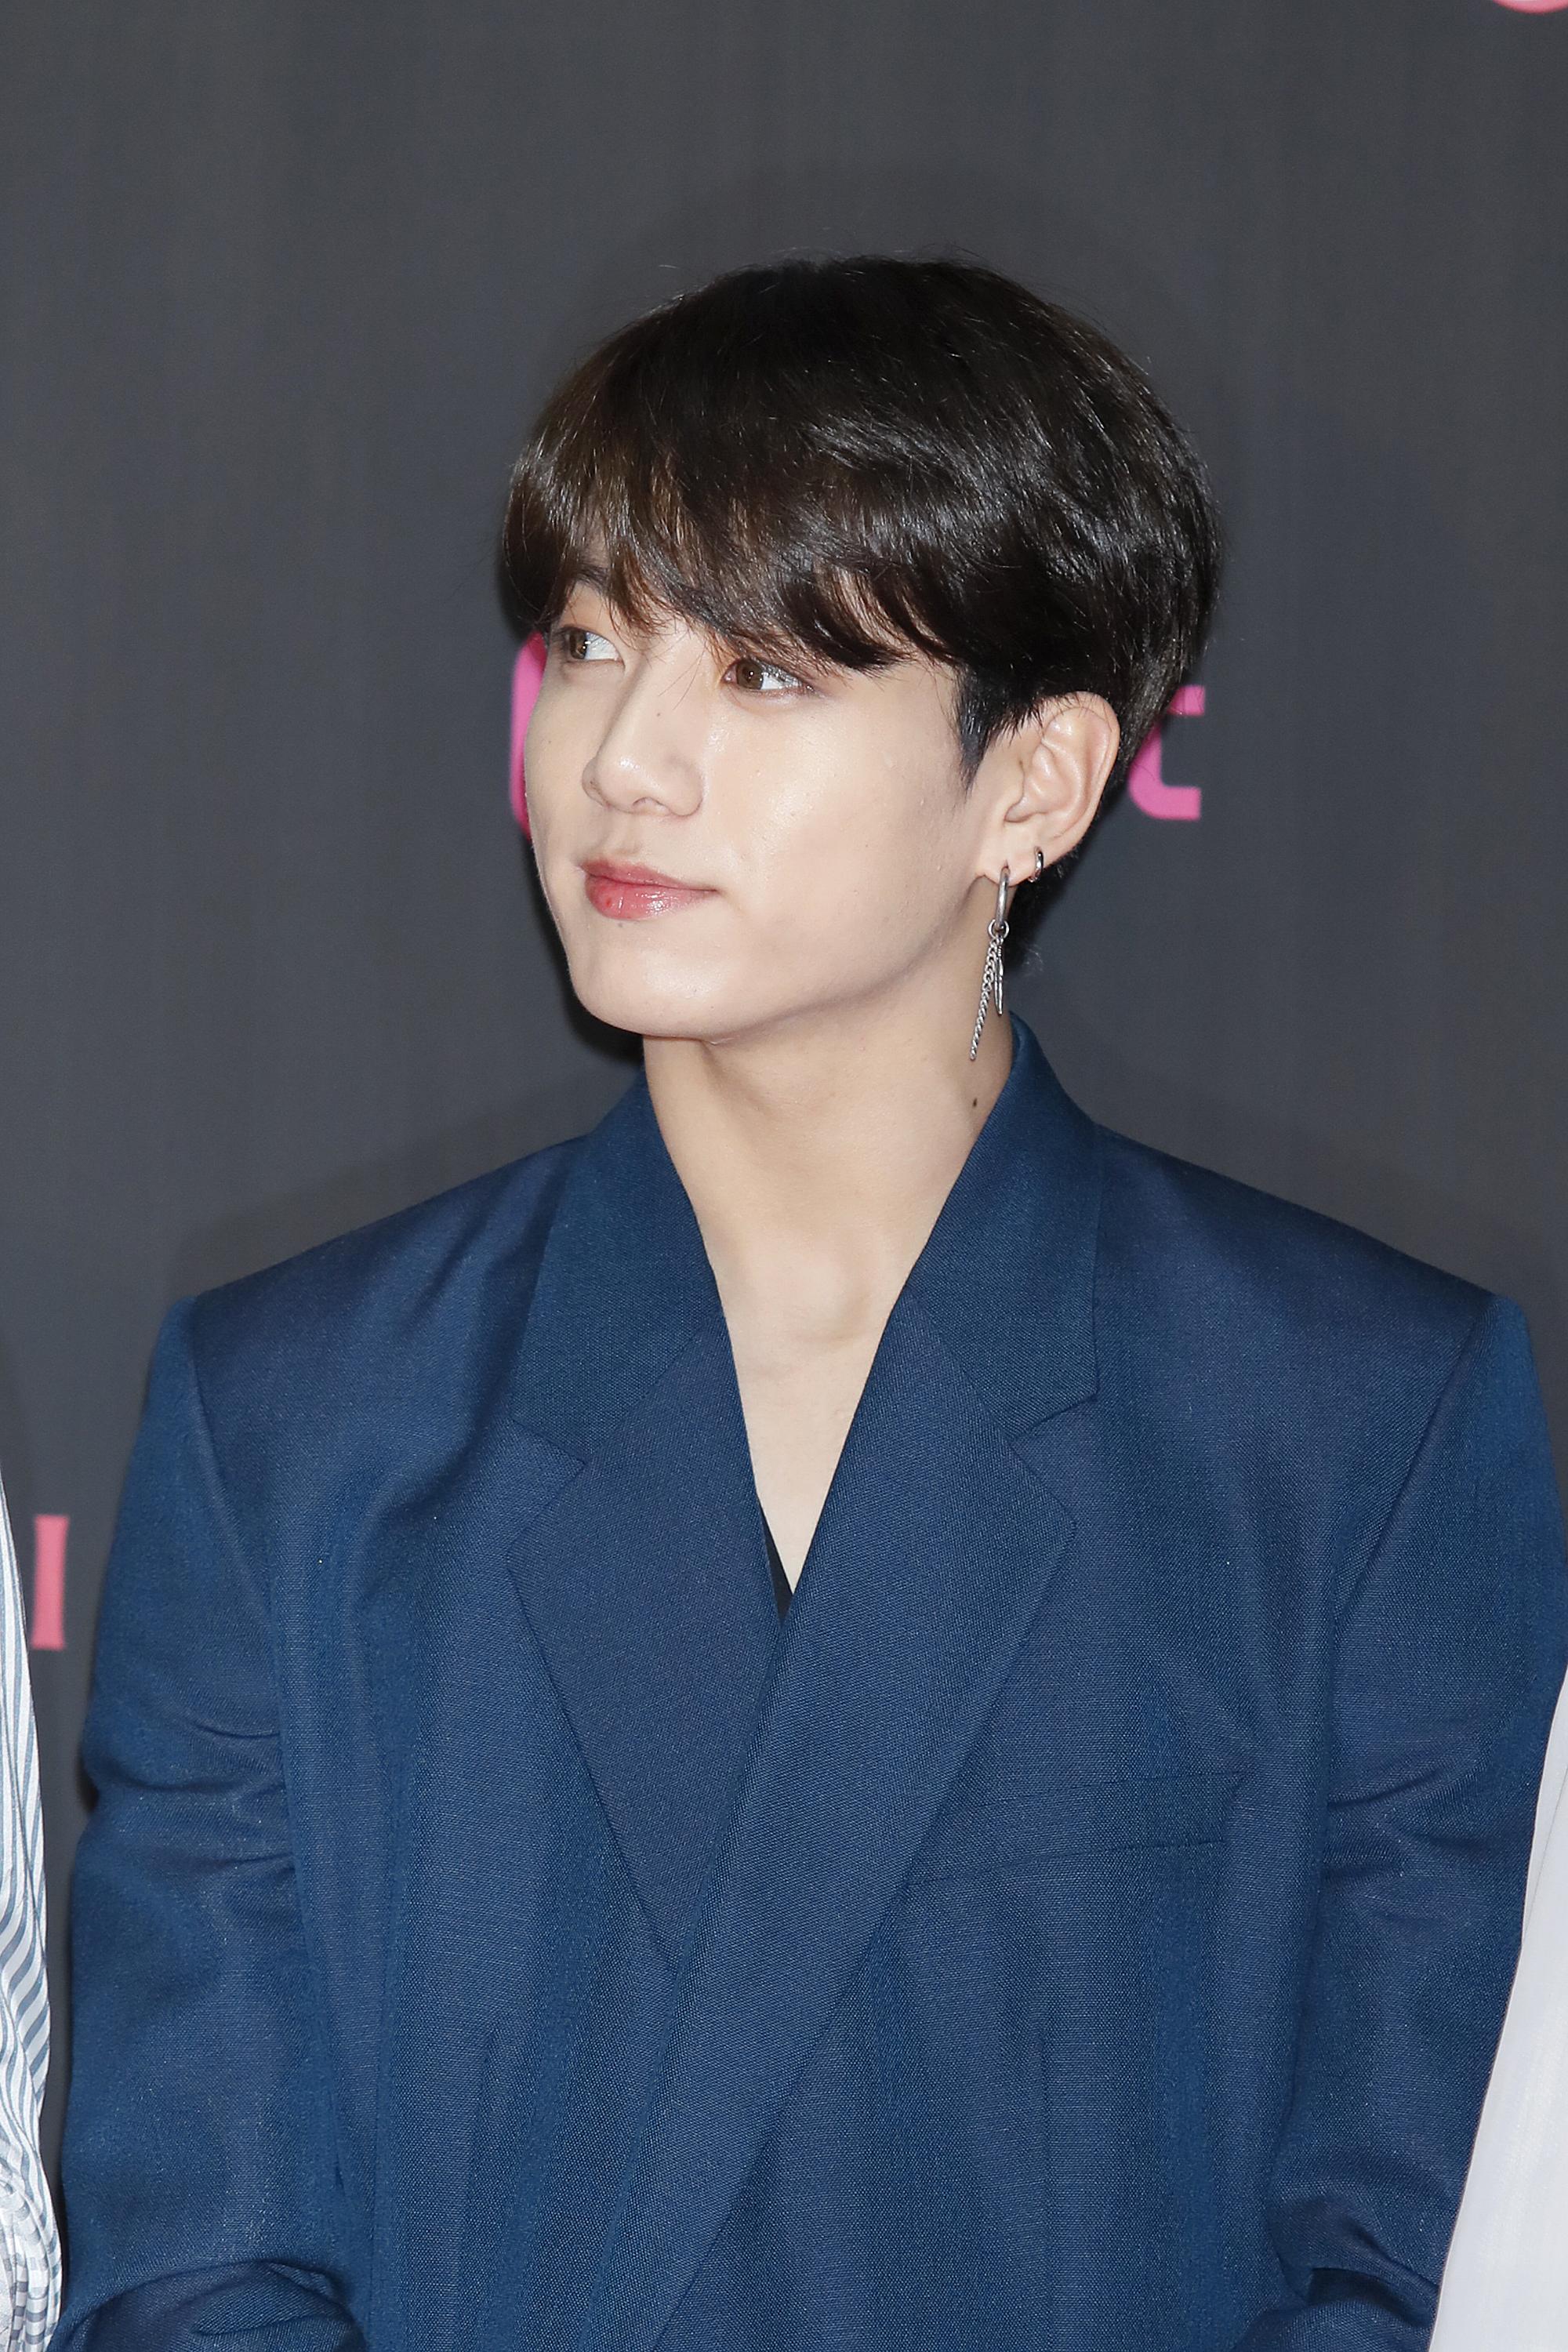 BTS' Jungkook's New Photo Of His Hair Shows It's Longer Than